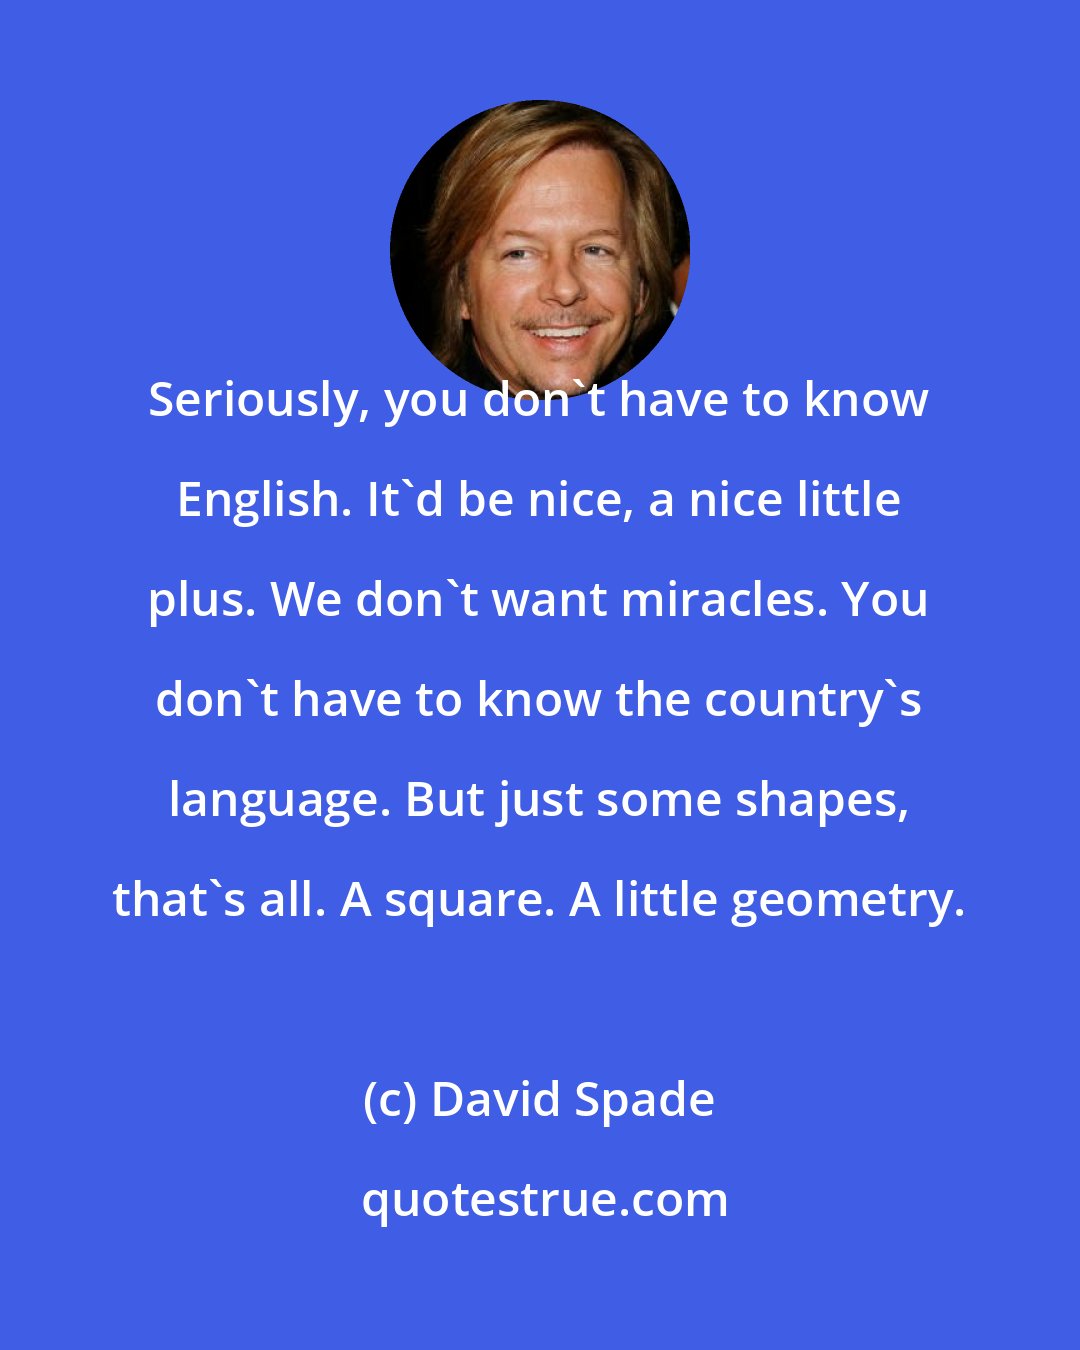 David Spade: Seriously, you don't have to know English. It'd be nice, a nice little plus. We don't want miracles. You don't have to know the country's language. But just some shapes, that's all. A square. A little geometry.